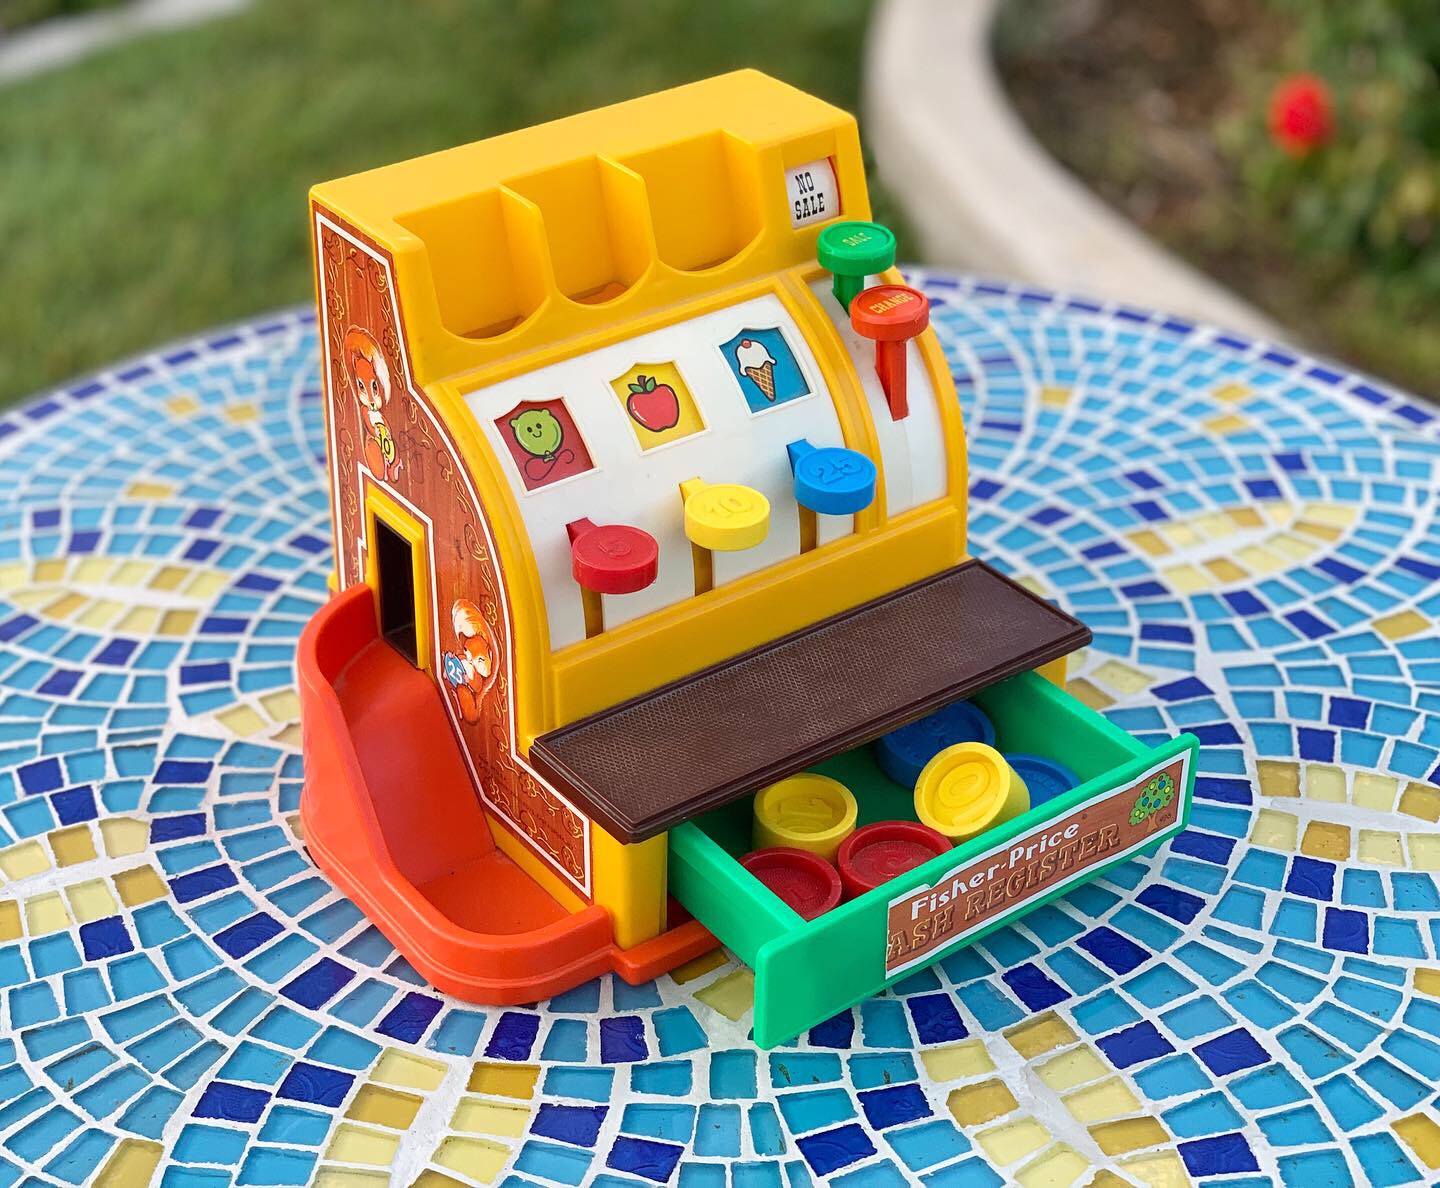 Fisher Price Cash Register Toy from the early 1980s